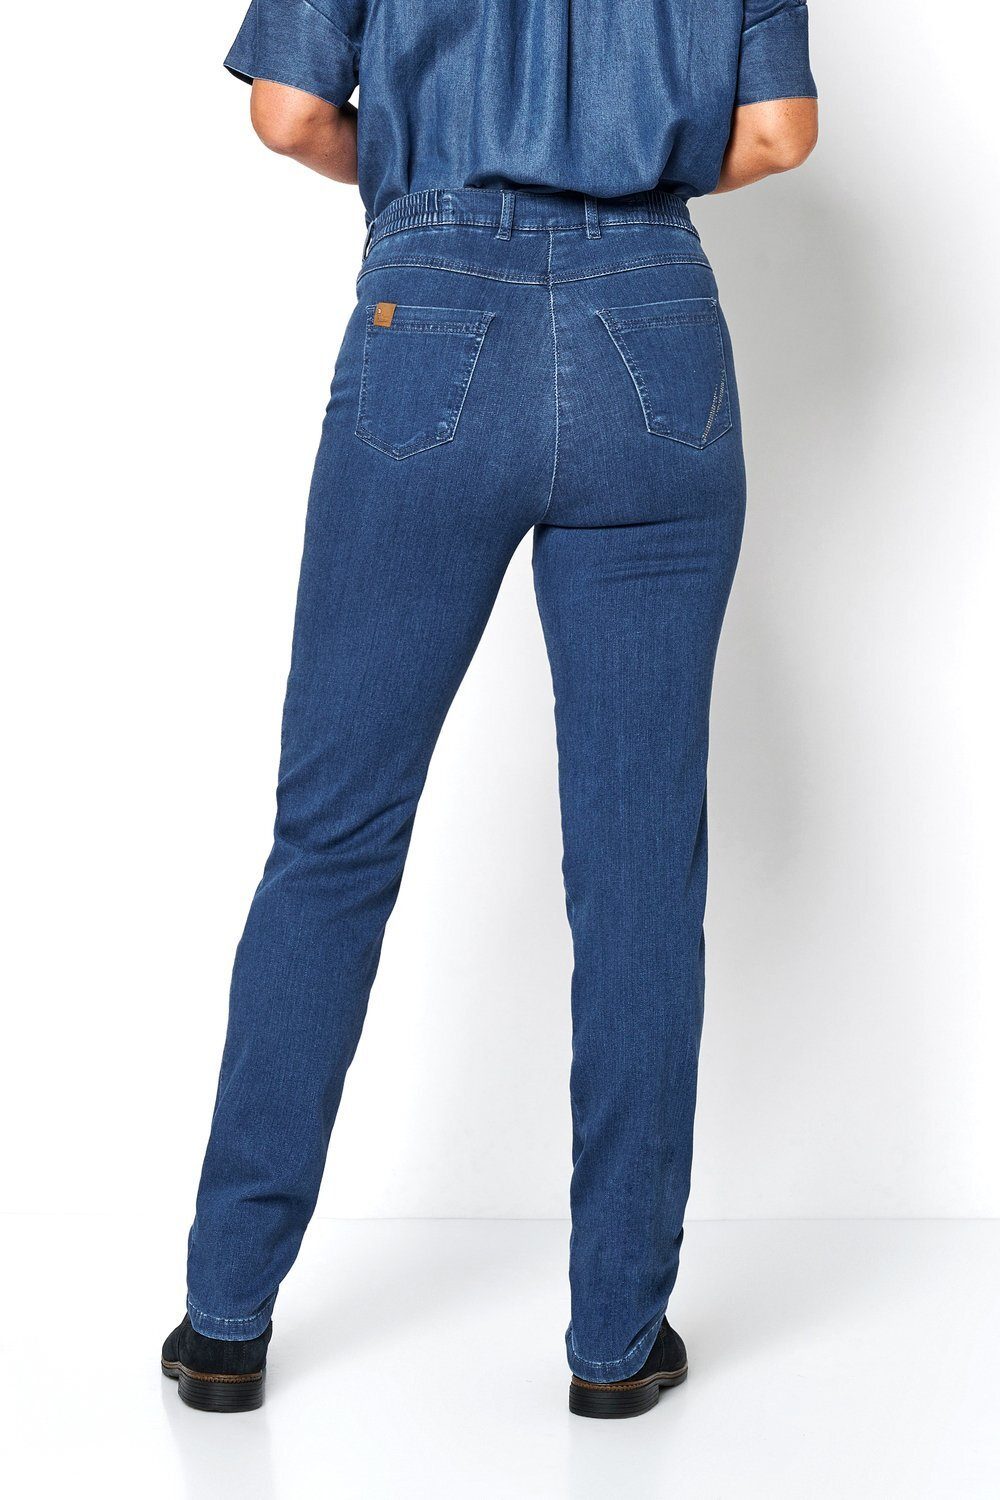 Relaxed by TONI 5-Pocket-Jeans Belmonte mit Strassdetail